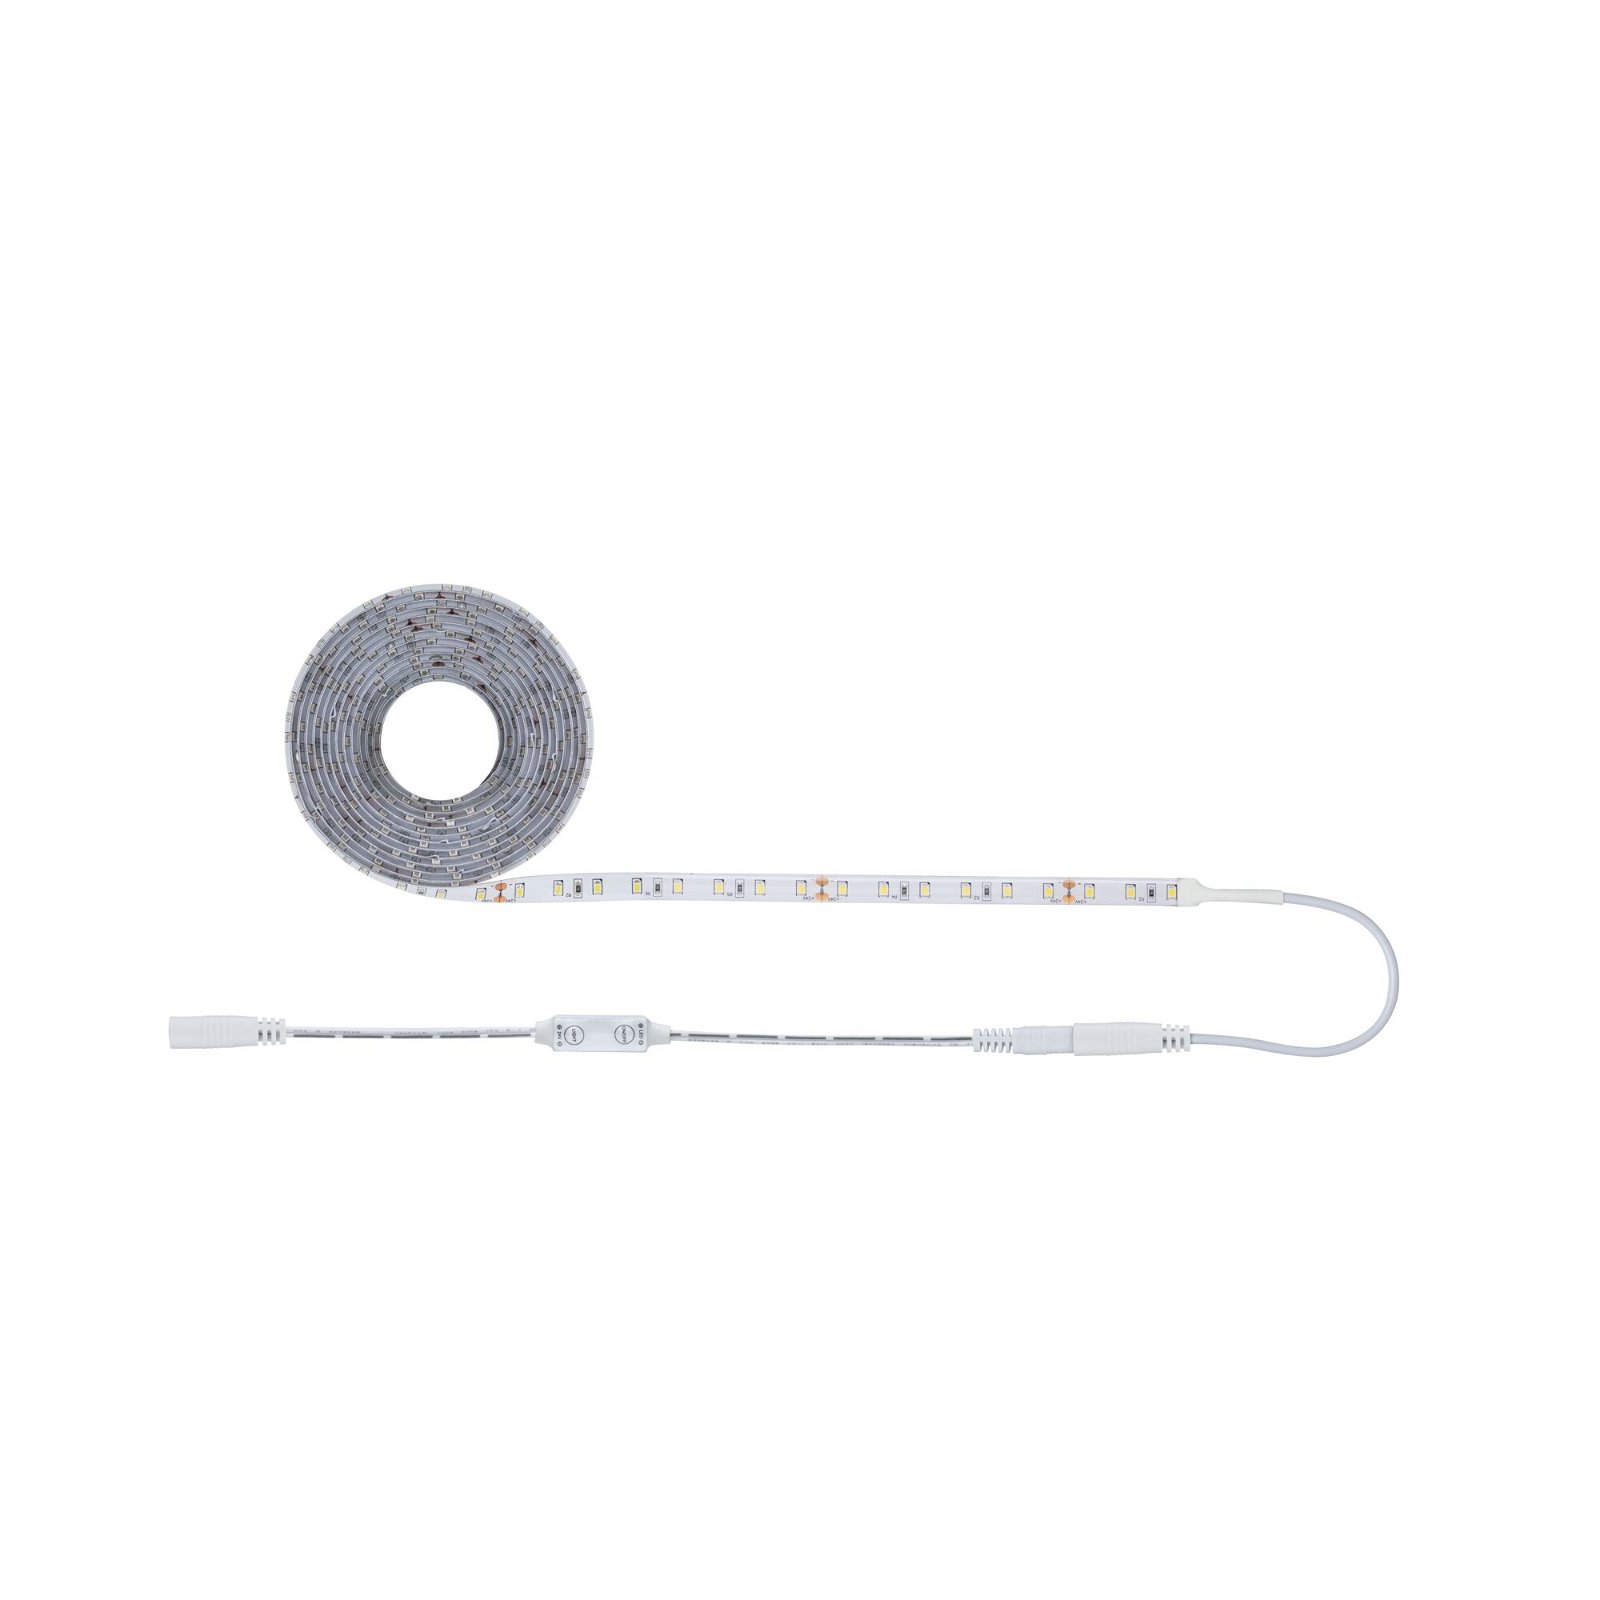 SimpLED Power LED Strip Neutral white incl. Dimm/Switch Complete set 3m protect cover 33W 1060lm/m 4000K 48VA